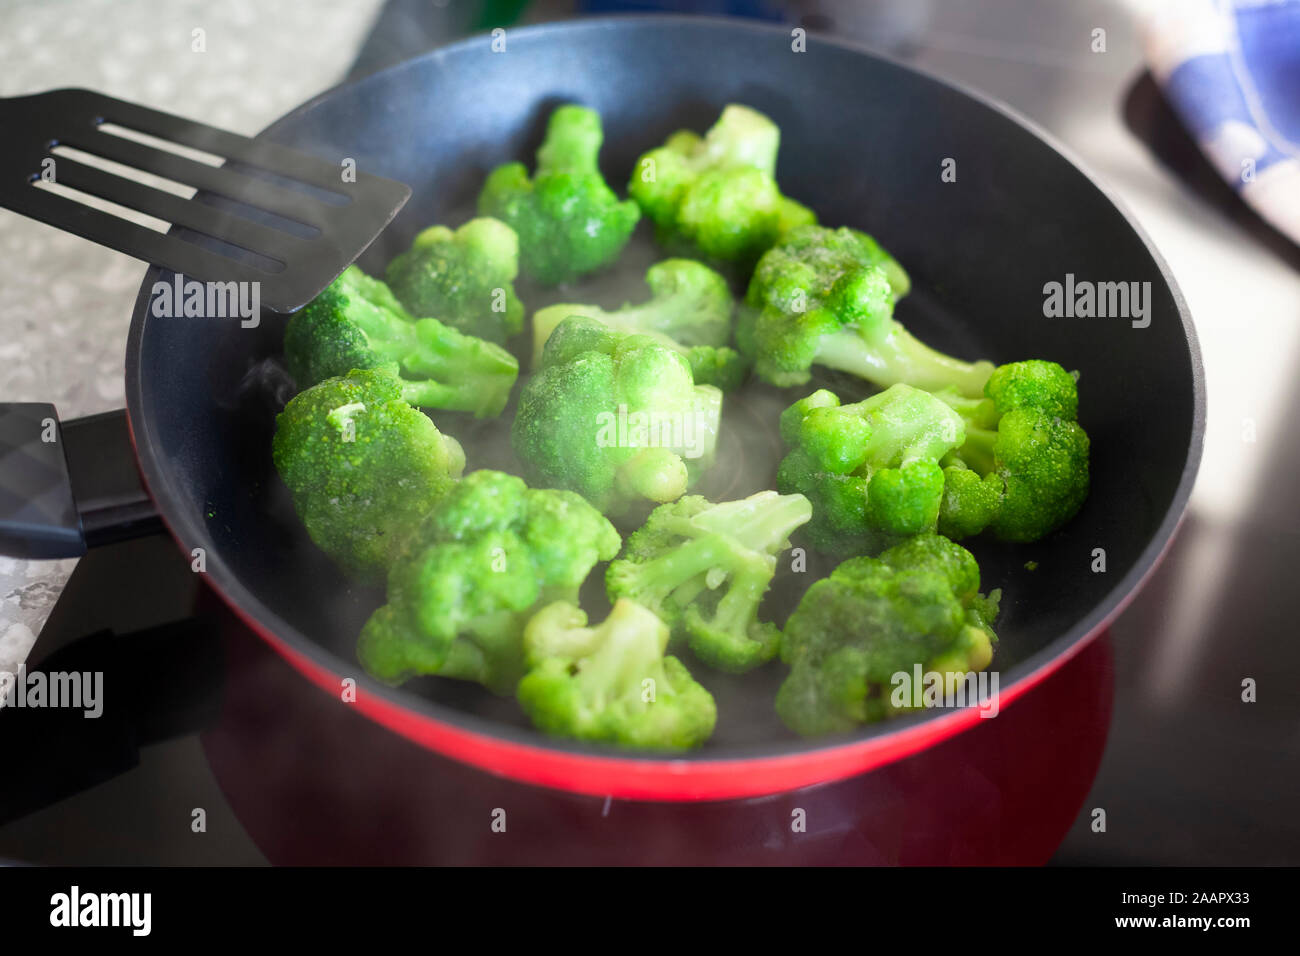 Frying frozen broccoli in a pan. Close up. Stock Photo